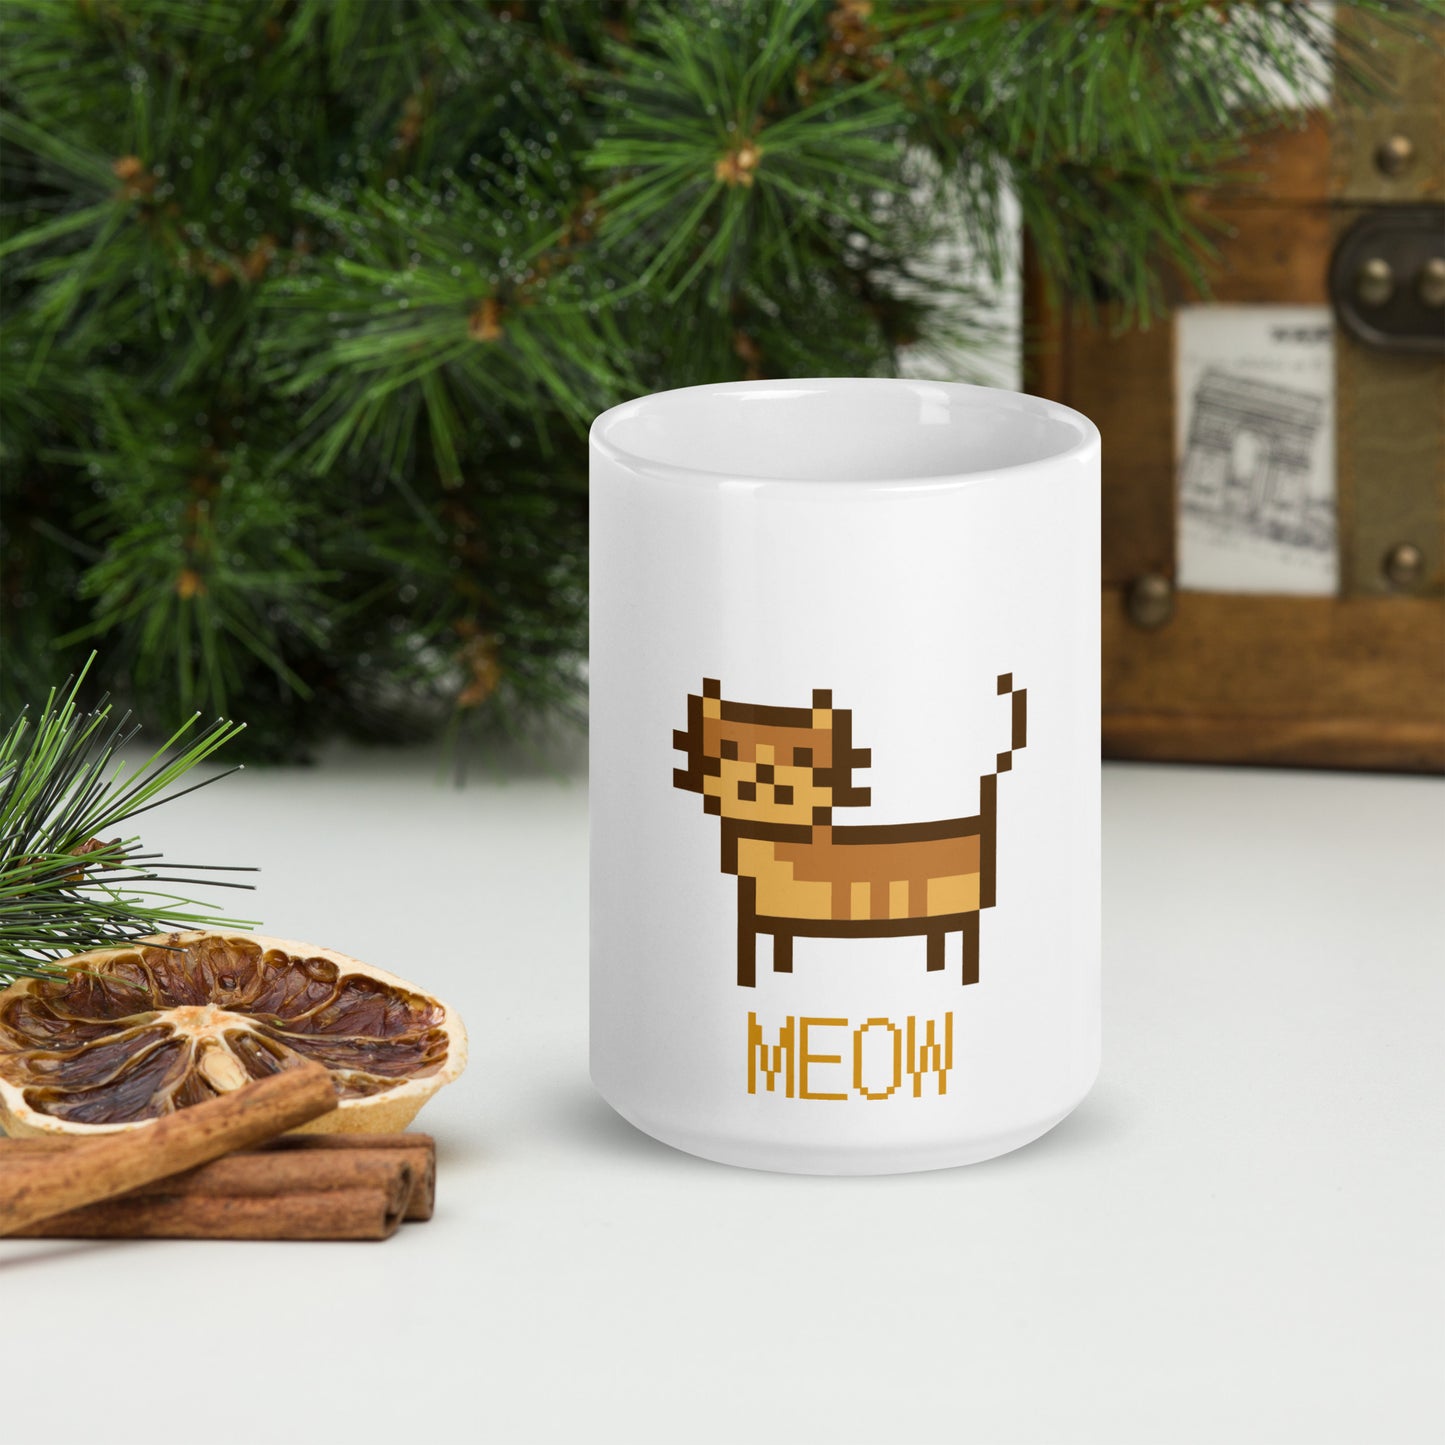 white mug with print of a cat and text "meow"